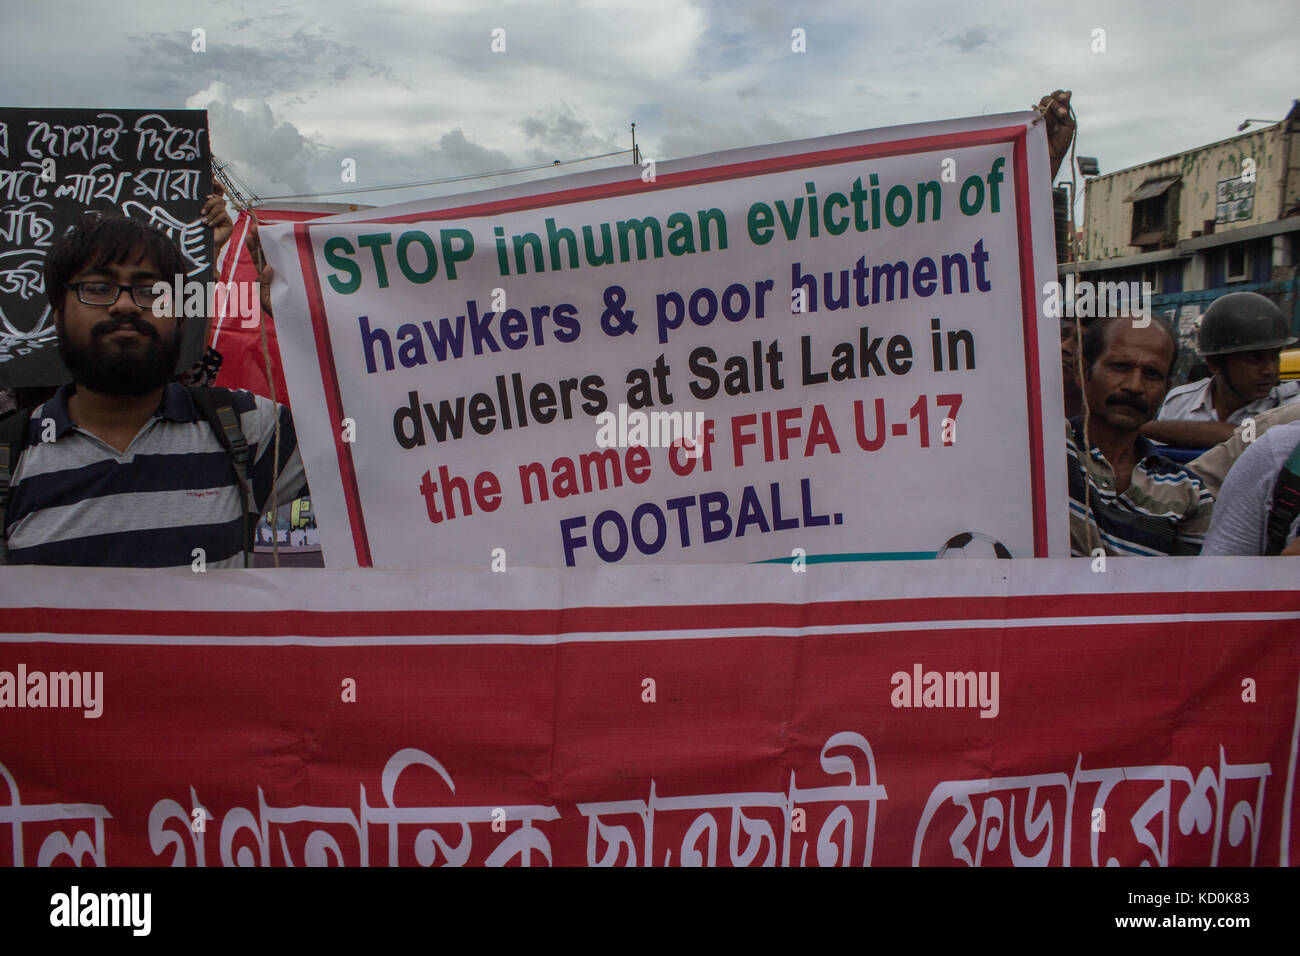 Kolkata, India. 8th October, 2017. Protest against forceful eviction of slum dwellers and hawkers for FIFA U-17 World Cup at Kolkata, India Credit: Sudip Maiti/Alamy Live News Stock Photo